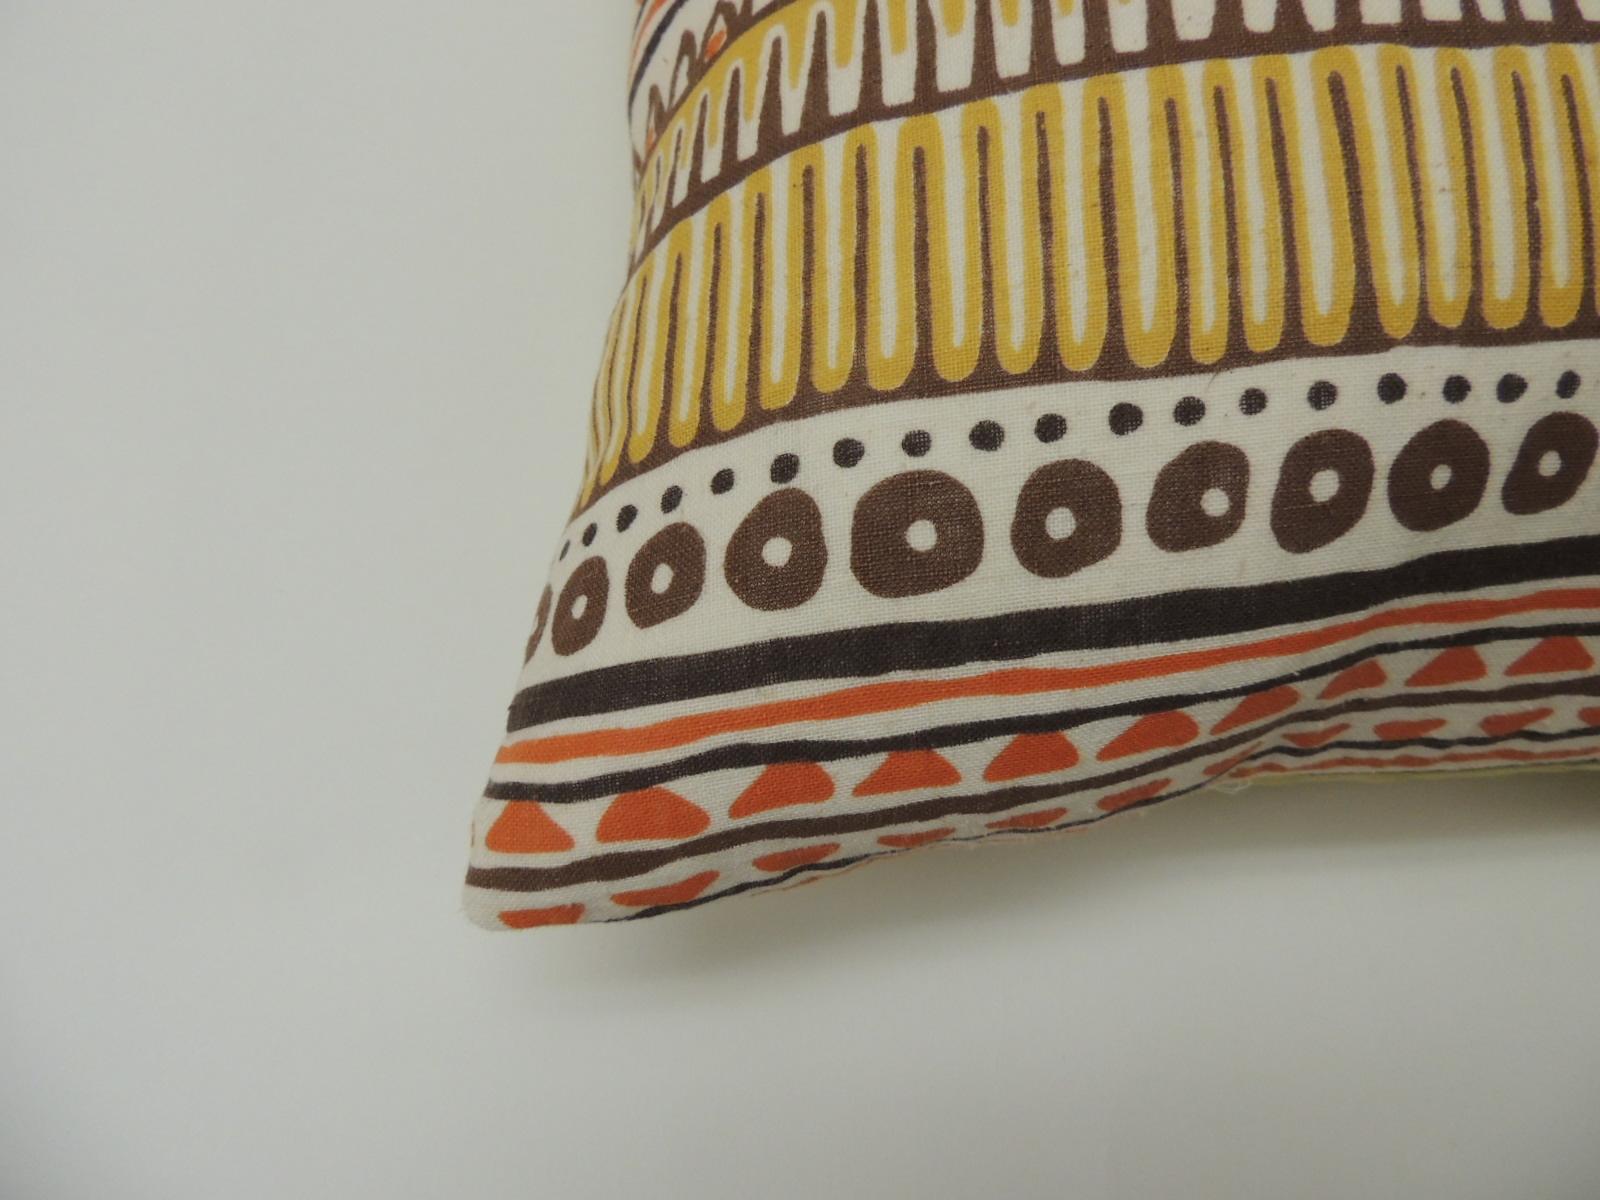 Stripe Bahia multi-color decorative pillow
Linen printed square pillow with yellow linen backing. In shades of yellow, orange, brown and natural.
The price on the pillow includes a custom ATG feather/down insert. Invisible zipper closure.